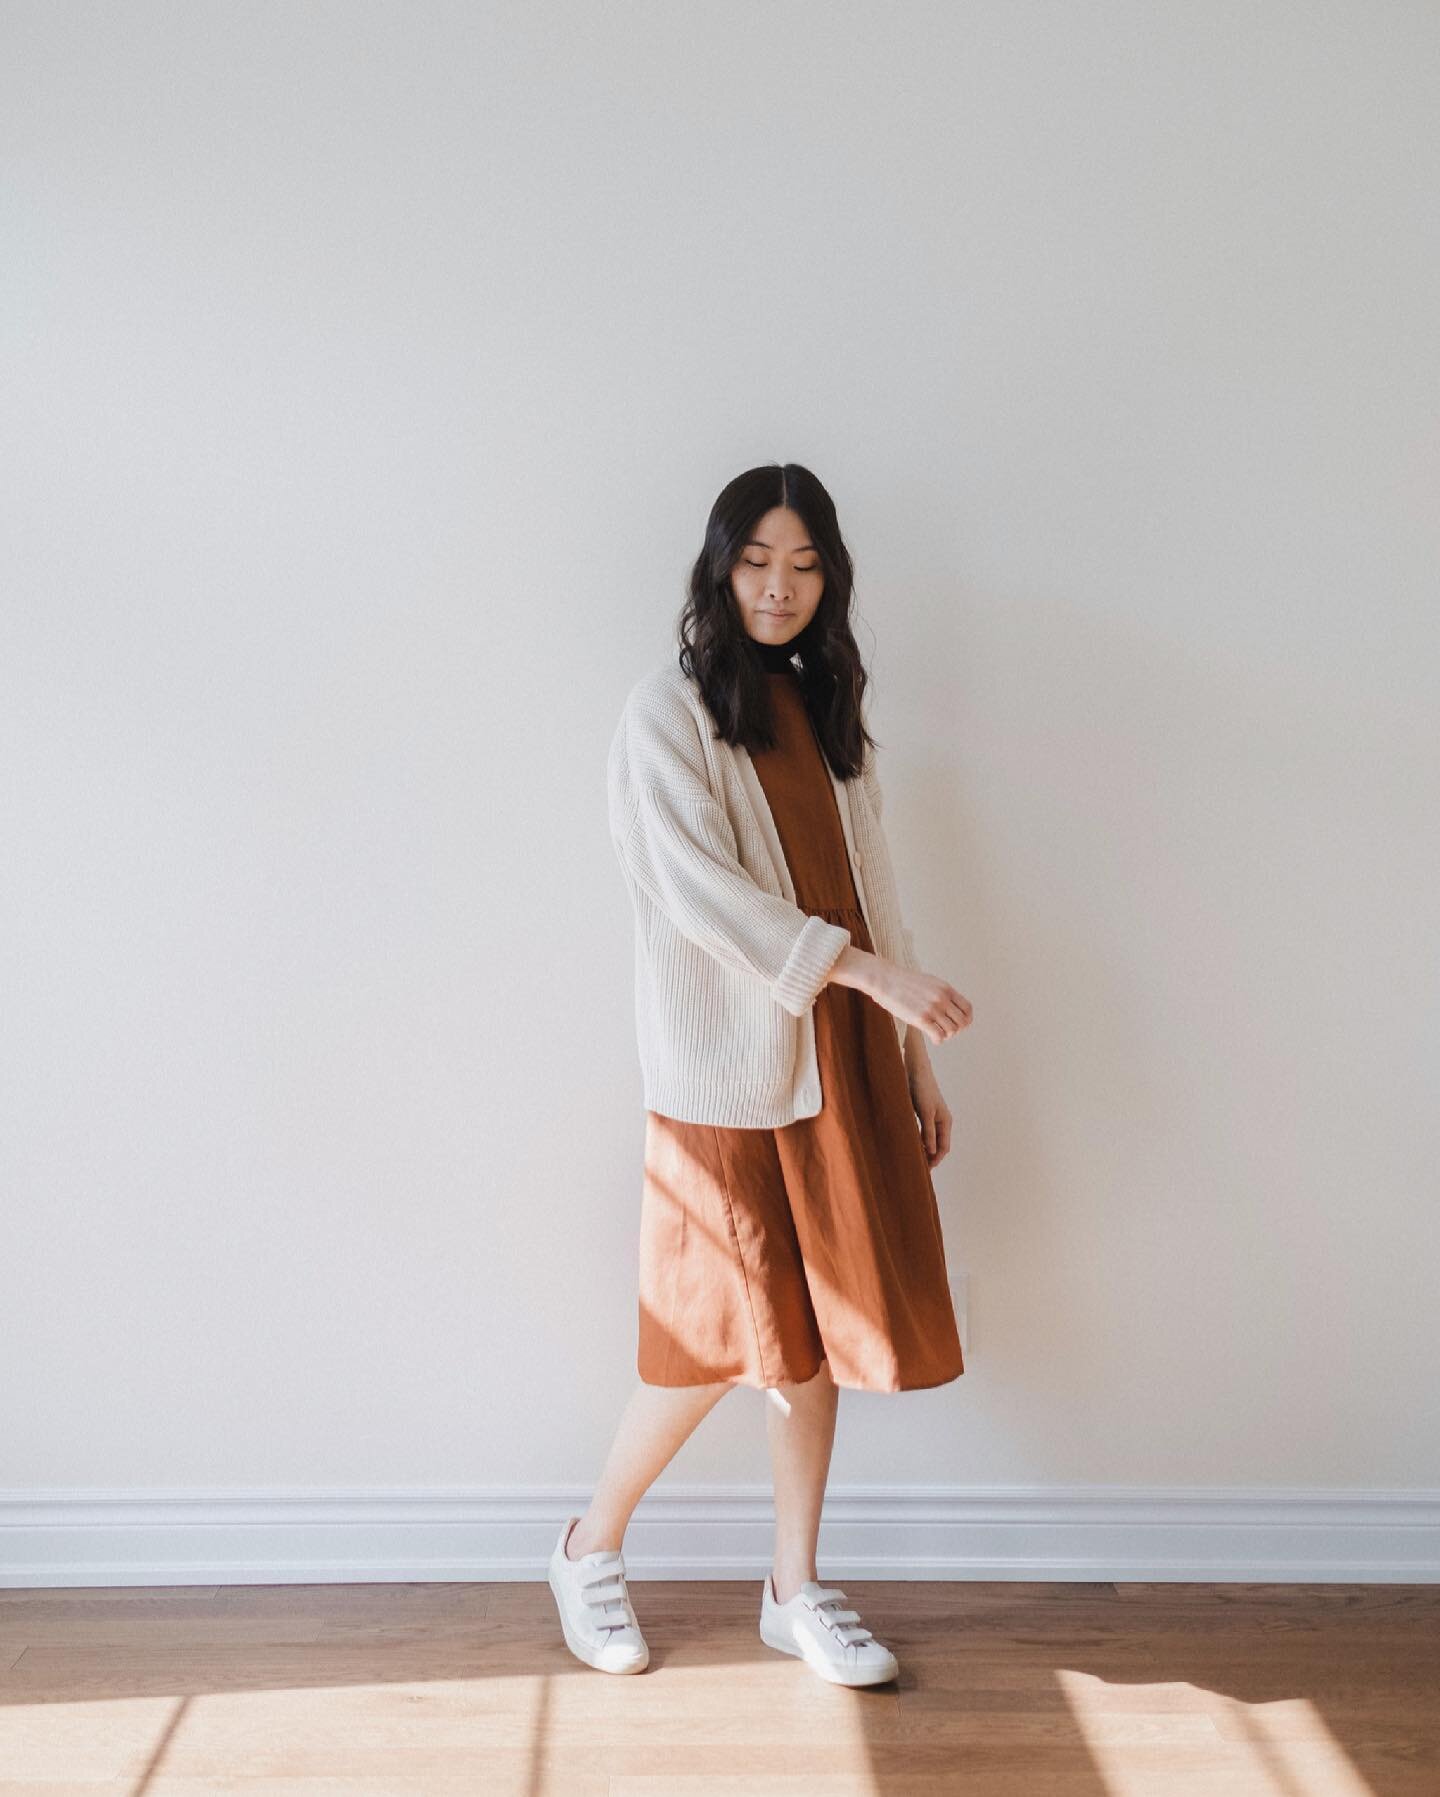 The @tradlands SS21 launch is live! You can now grab the Candice Nico Dress along with other goodies from their Spring/Summer collection. The tones this season are just so beautiful and they even have my favourite, the Shelter Cardigan, in some new g